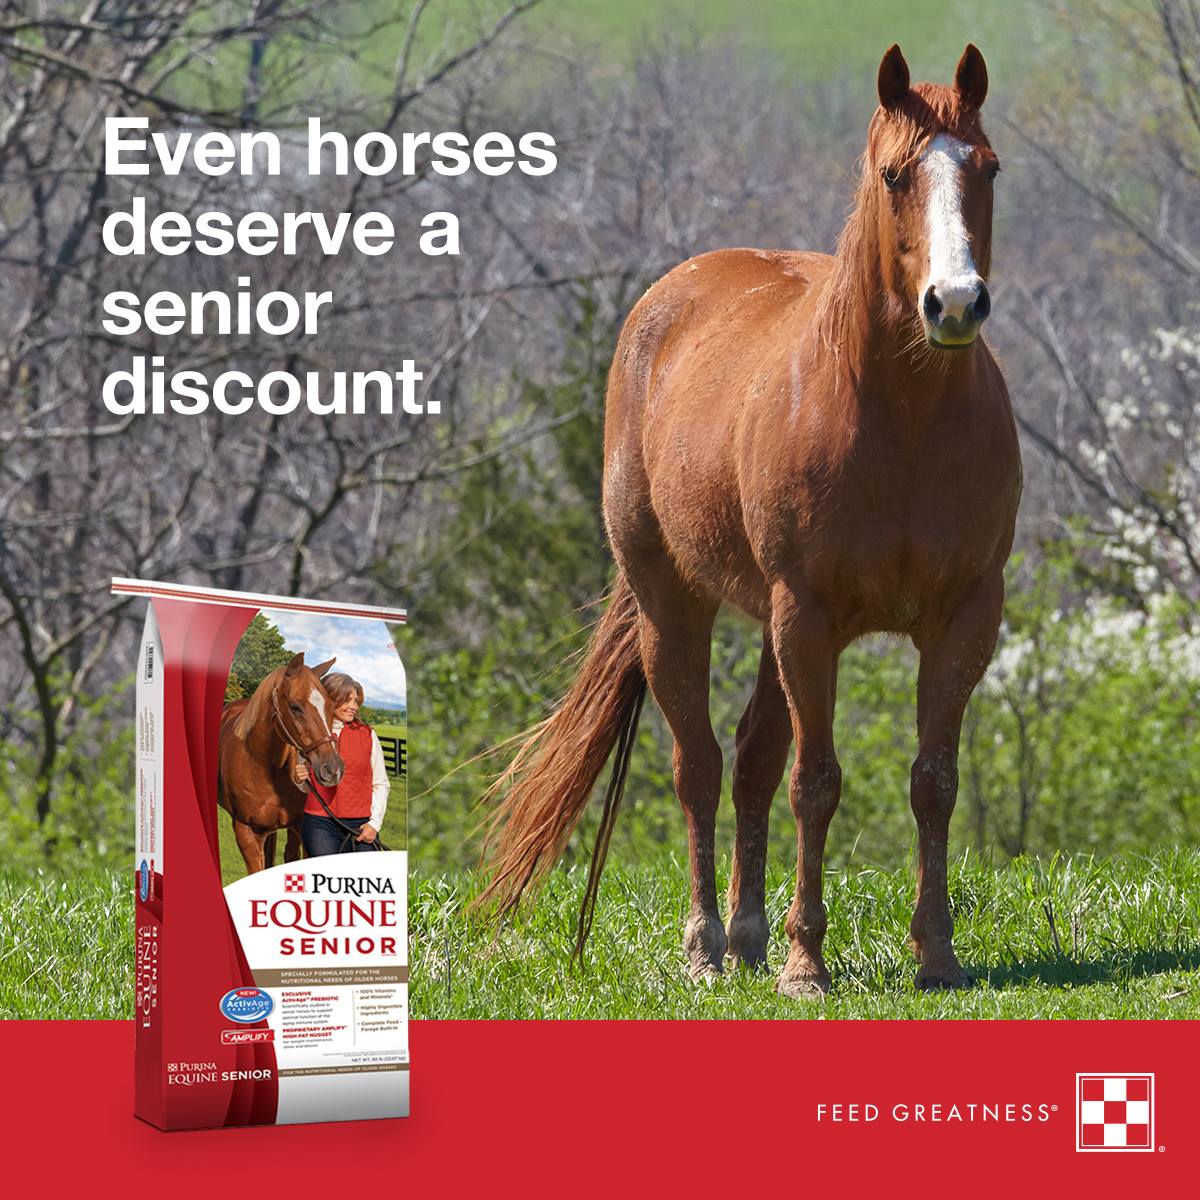 Save $10 on Purina Horse Supplements